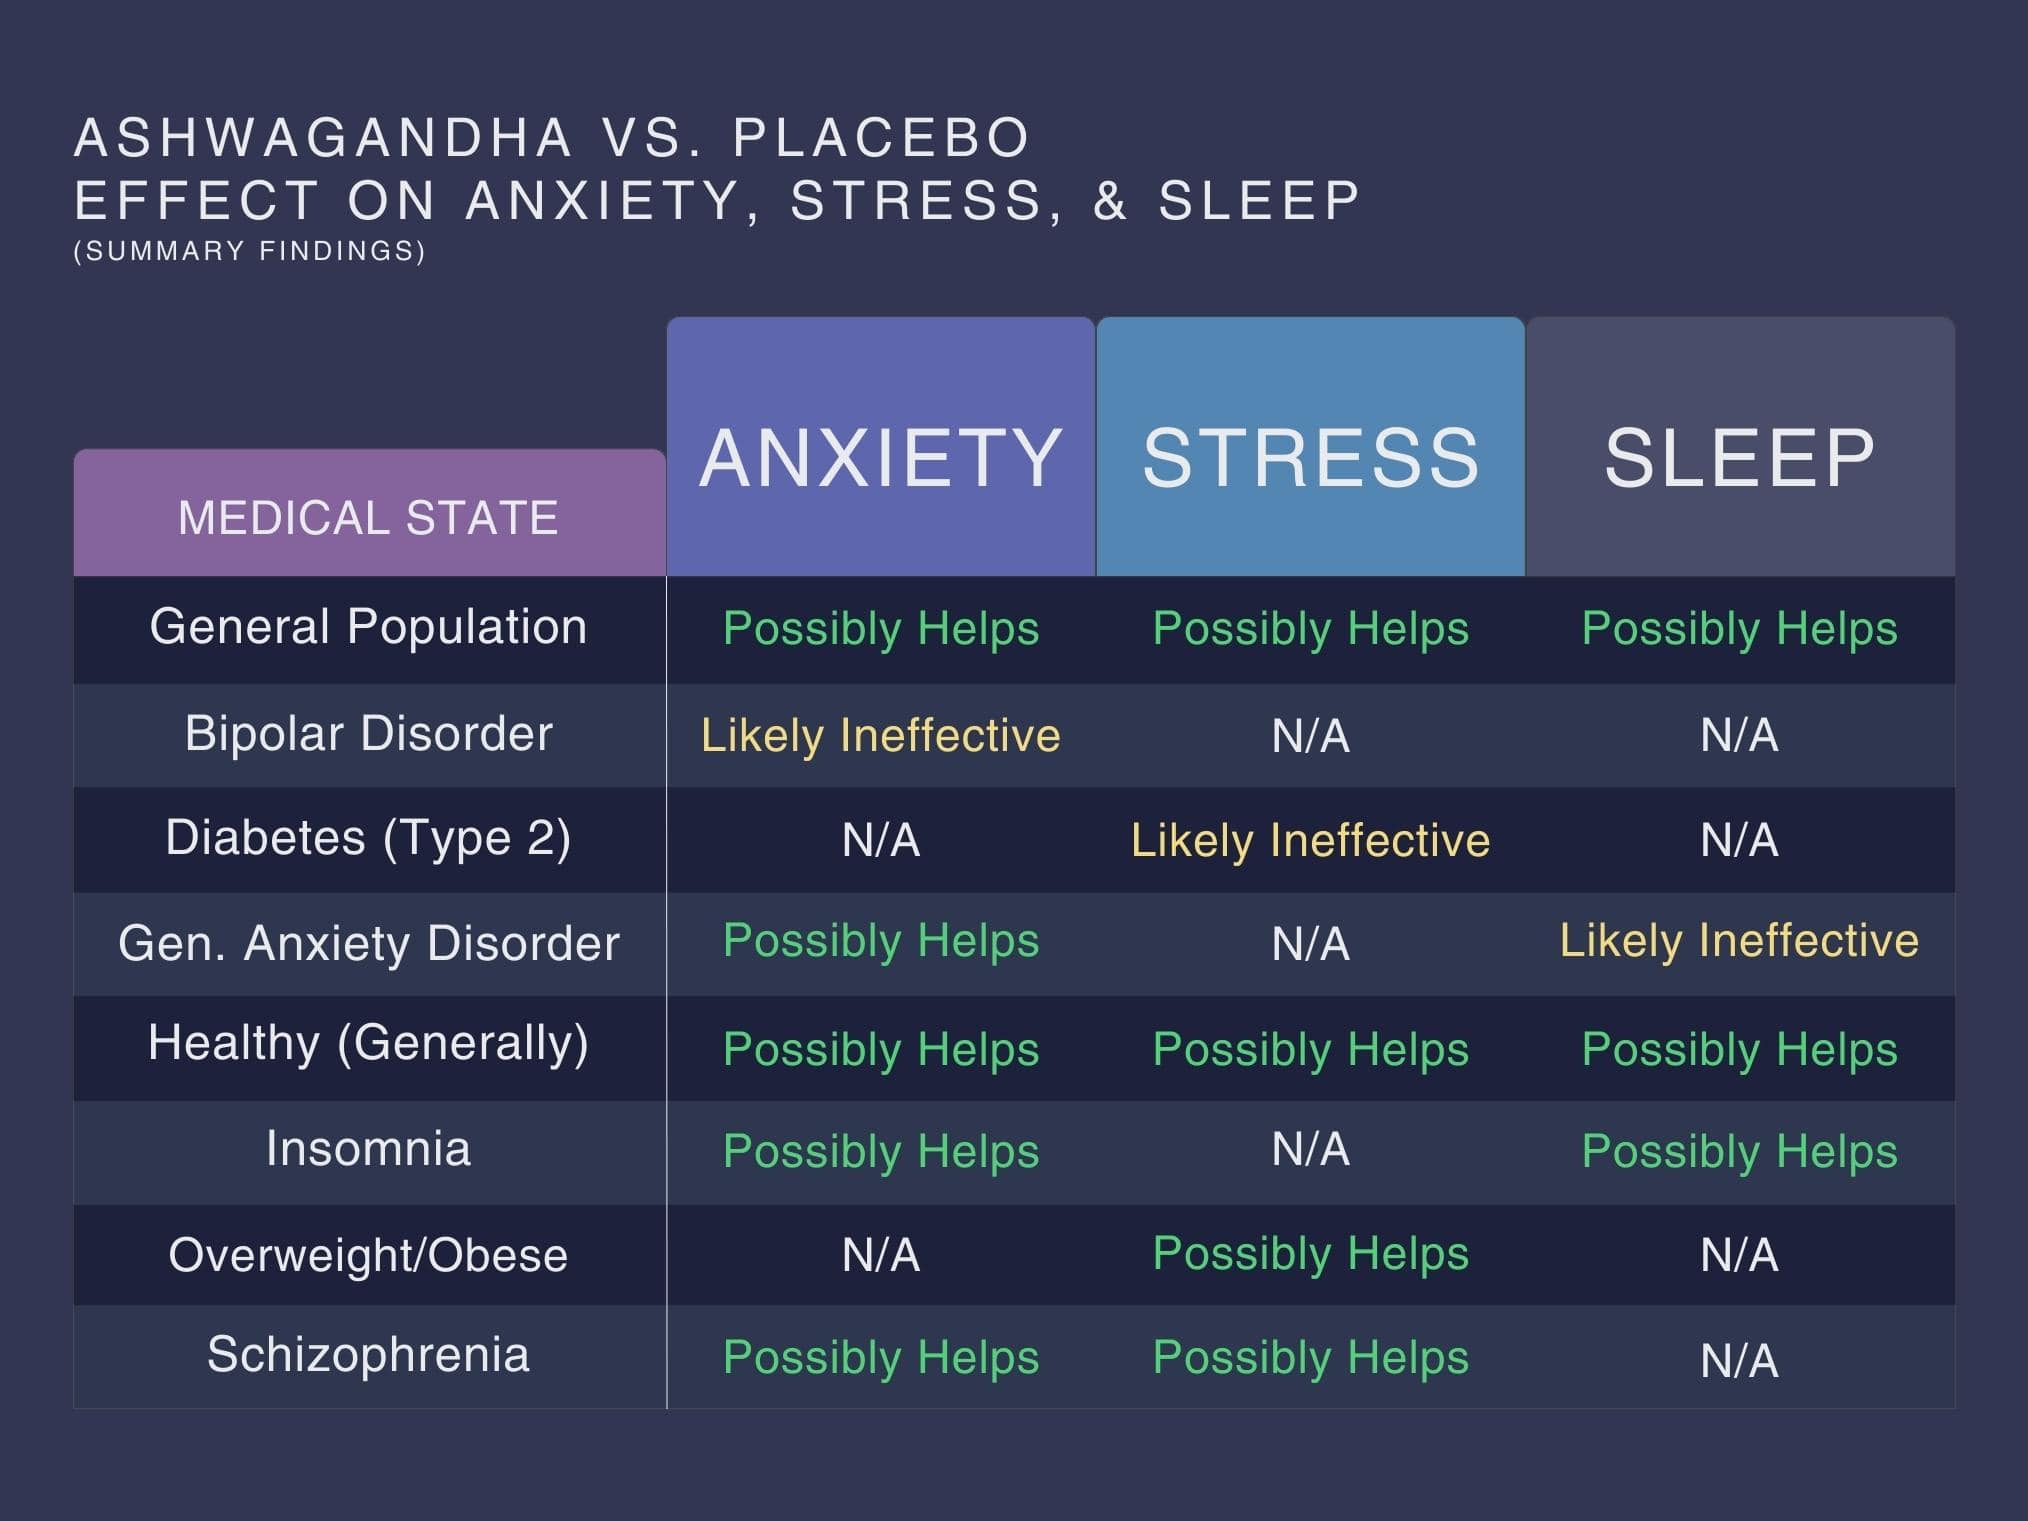 This image shows a summary table comparing ashwagandha vs. placebo and ashwagandha’s effect on anxiety, stress, and sleep. It shows that ashwagandha likely reduces anxiety, lowers stress, and improves sleep in the general adult population and in generally healthy people. Ashwagandha likely reduces anxiety but doesn’t improve sleep in people with generalized anxiety disorder. Ashwagandha might reduce anxiety and improve sleep in people with insomnia. Ashwagandha may reduce anxiety and lower stress better than placebo in people with schizophrenia. Finally, ashwagandha may not effectively reduce anxiety in bipolar disorder nor lower stress in type 2 diabetes mellitus.